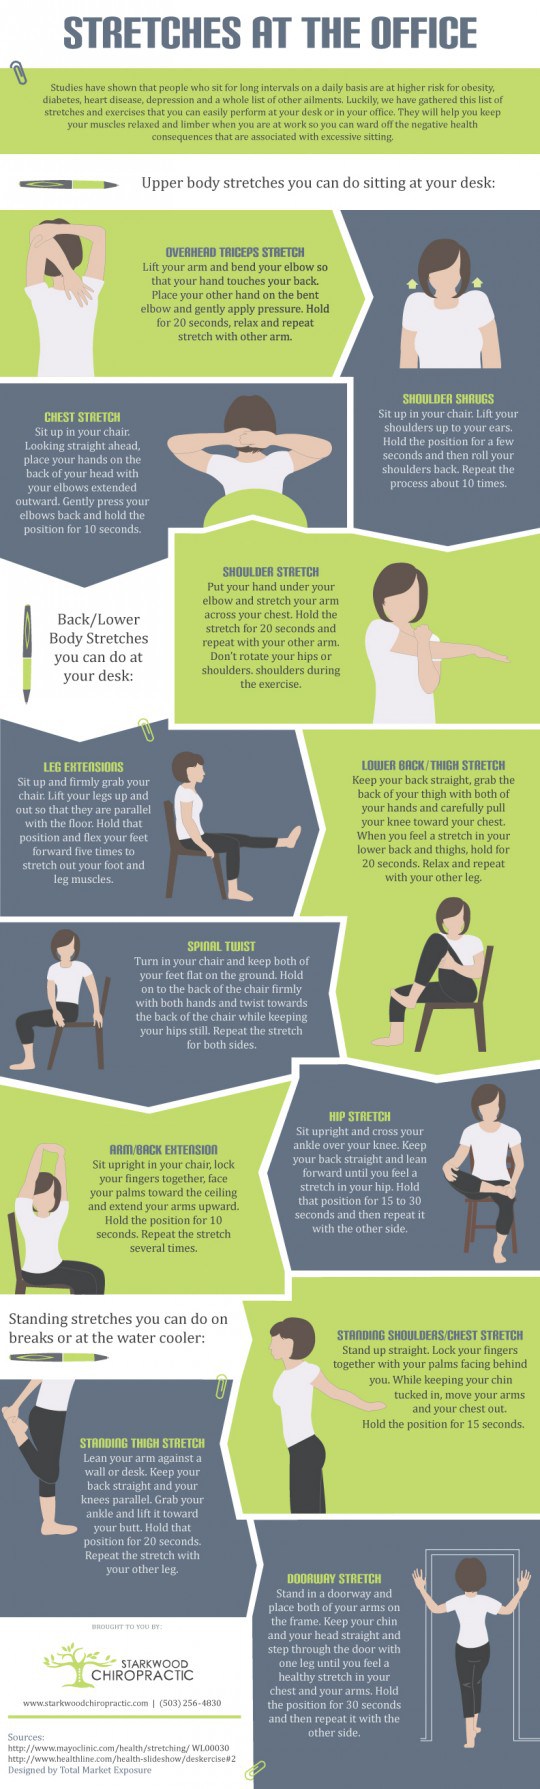 12-Exercises-That-Will-Refresh-Your-Tired-and-Cramped-Muscles-At-Work-1